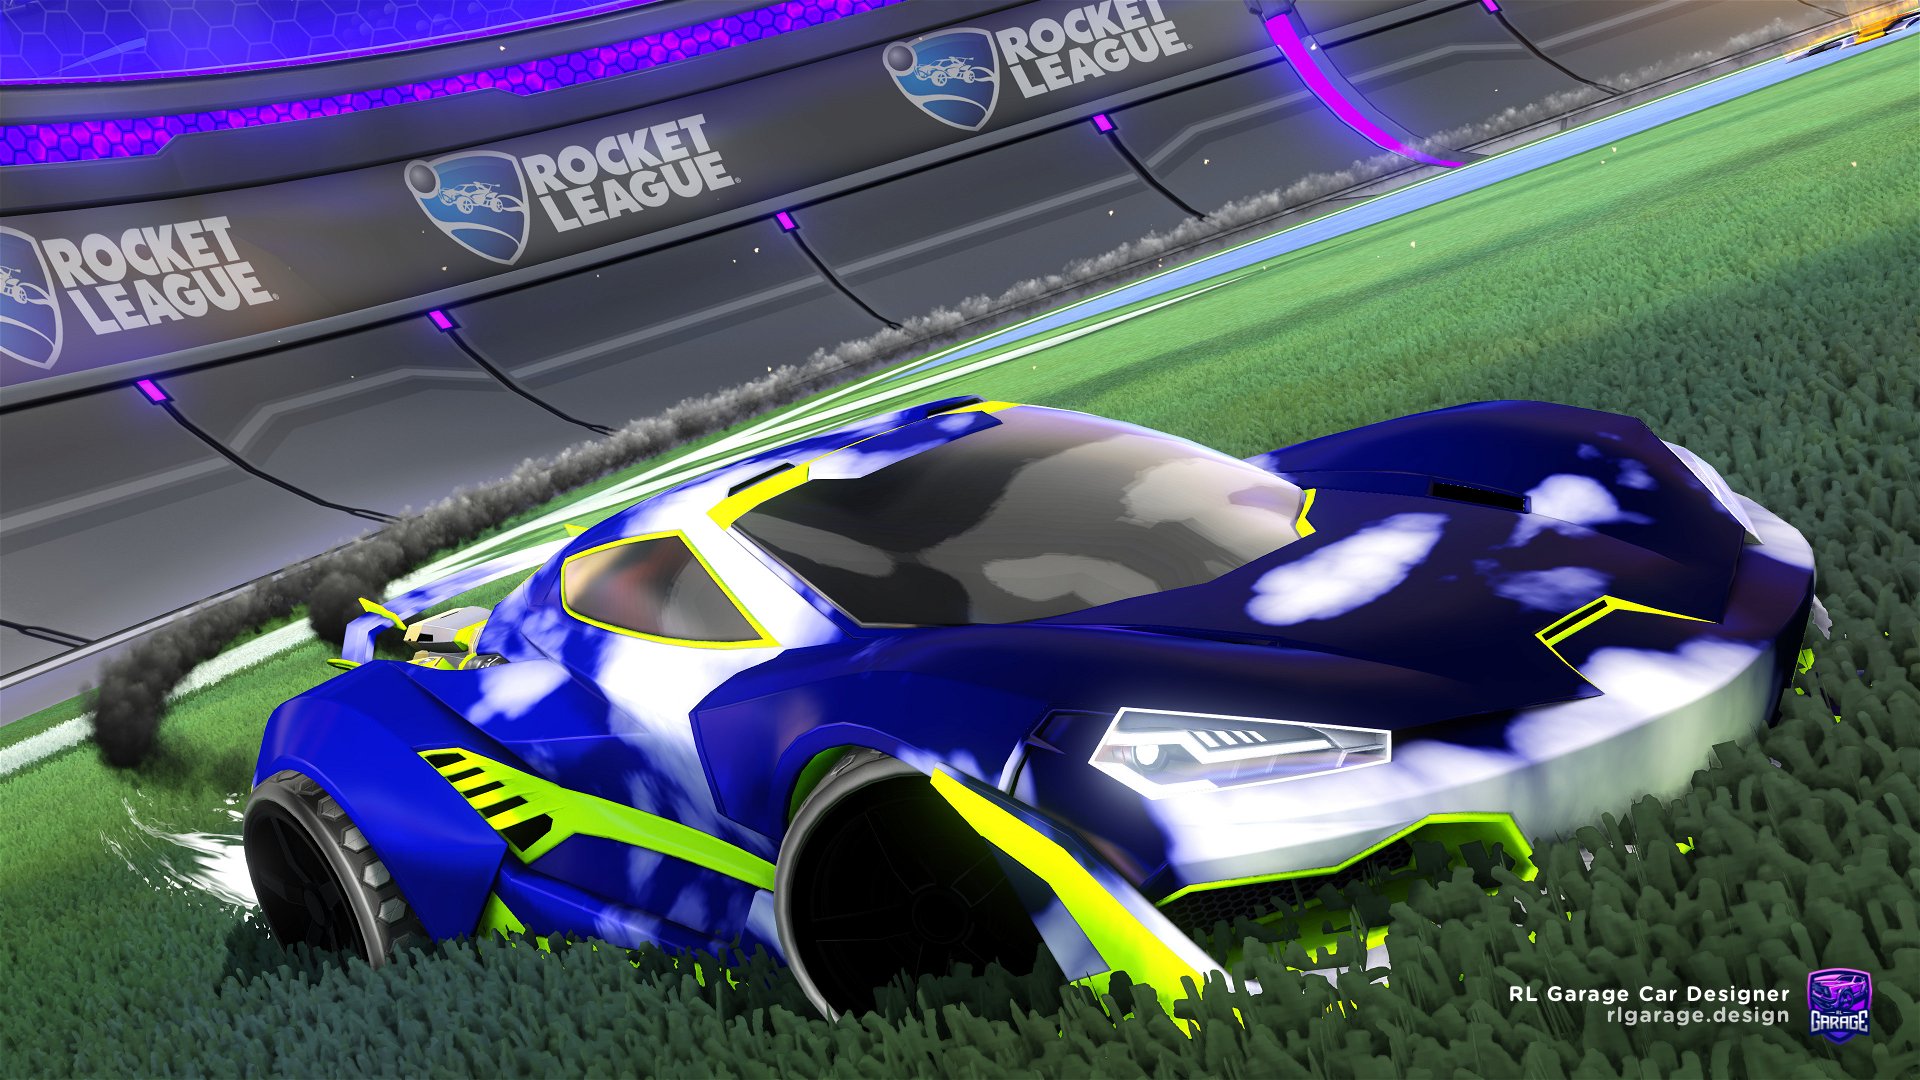 A Rocket League car design by Jplhproplay